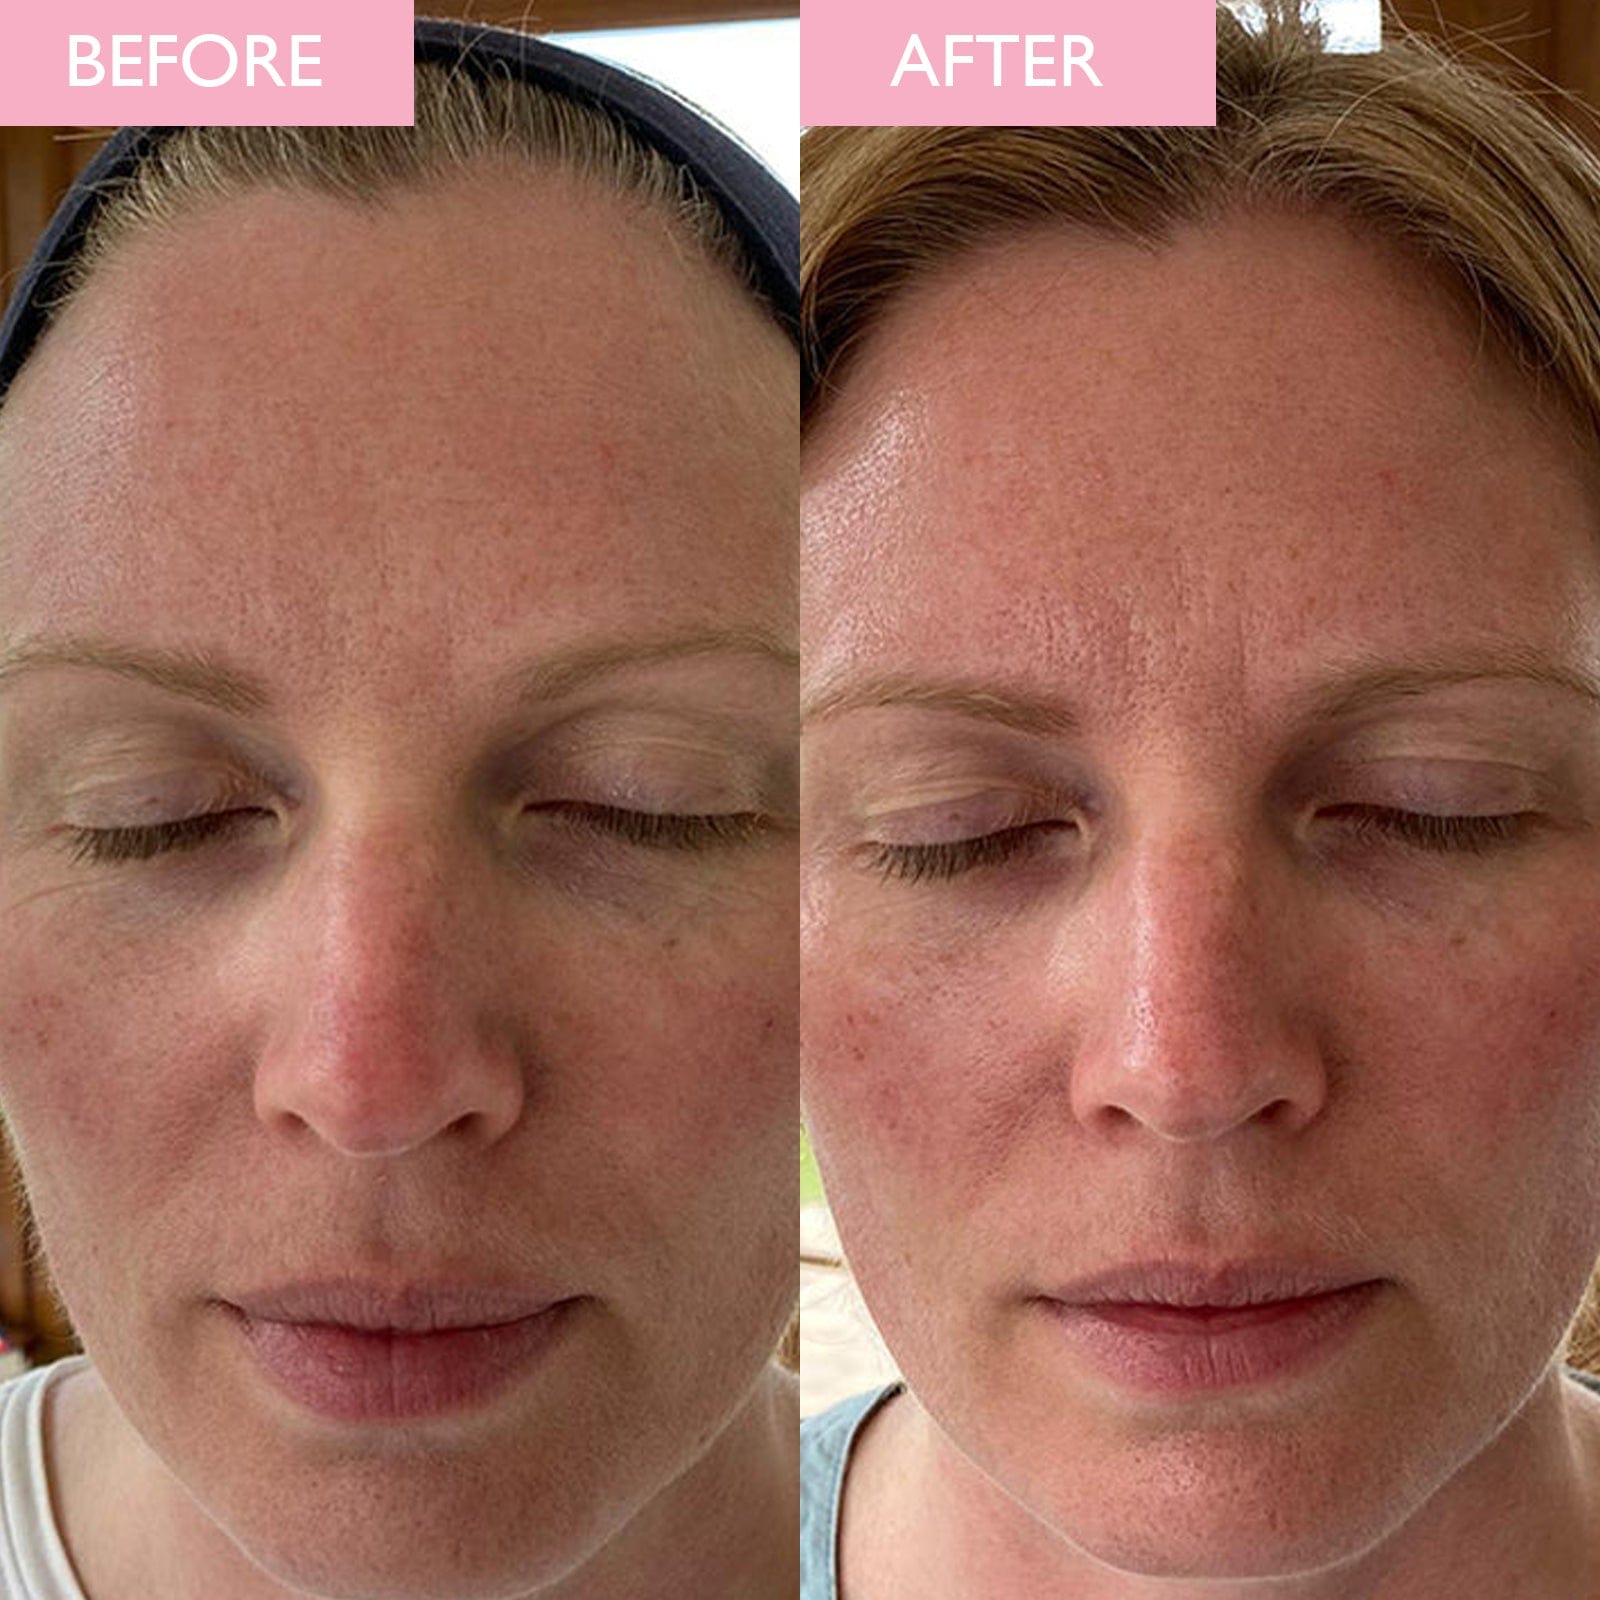 Before and after image showing difference in skin hydration